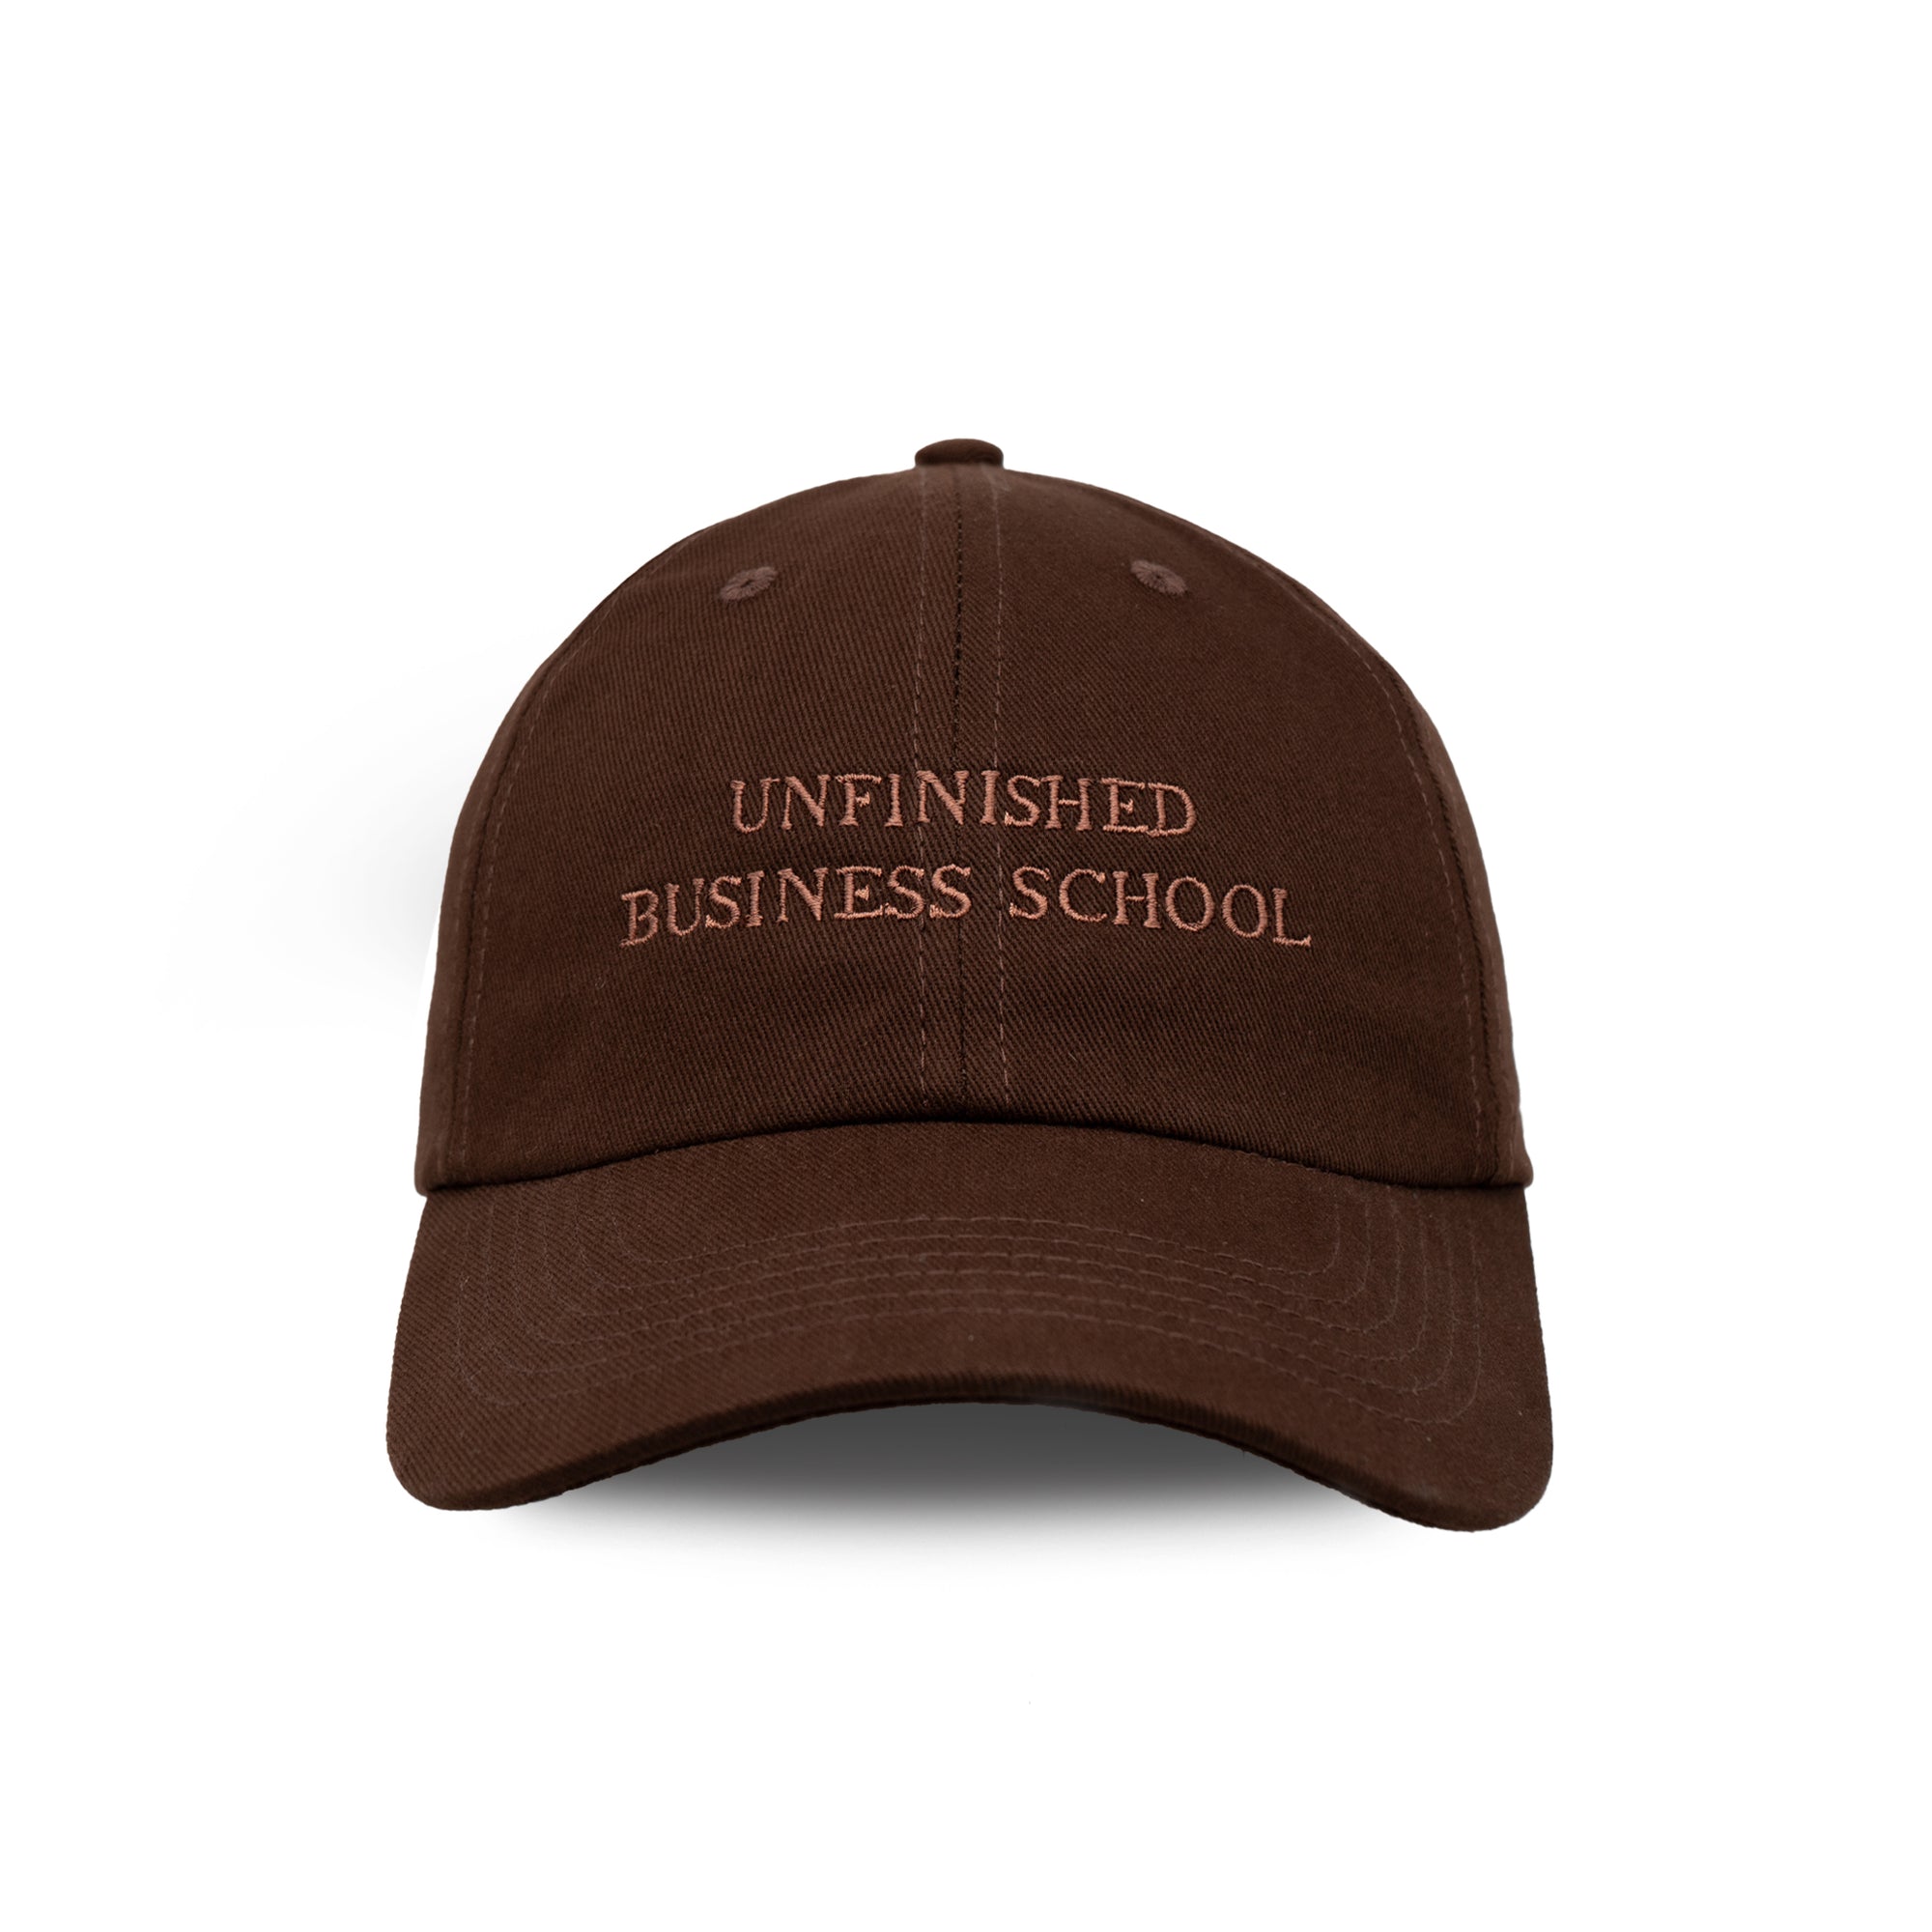 UNFINISHED BUSINESS SCHOOL